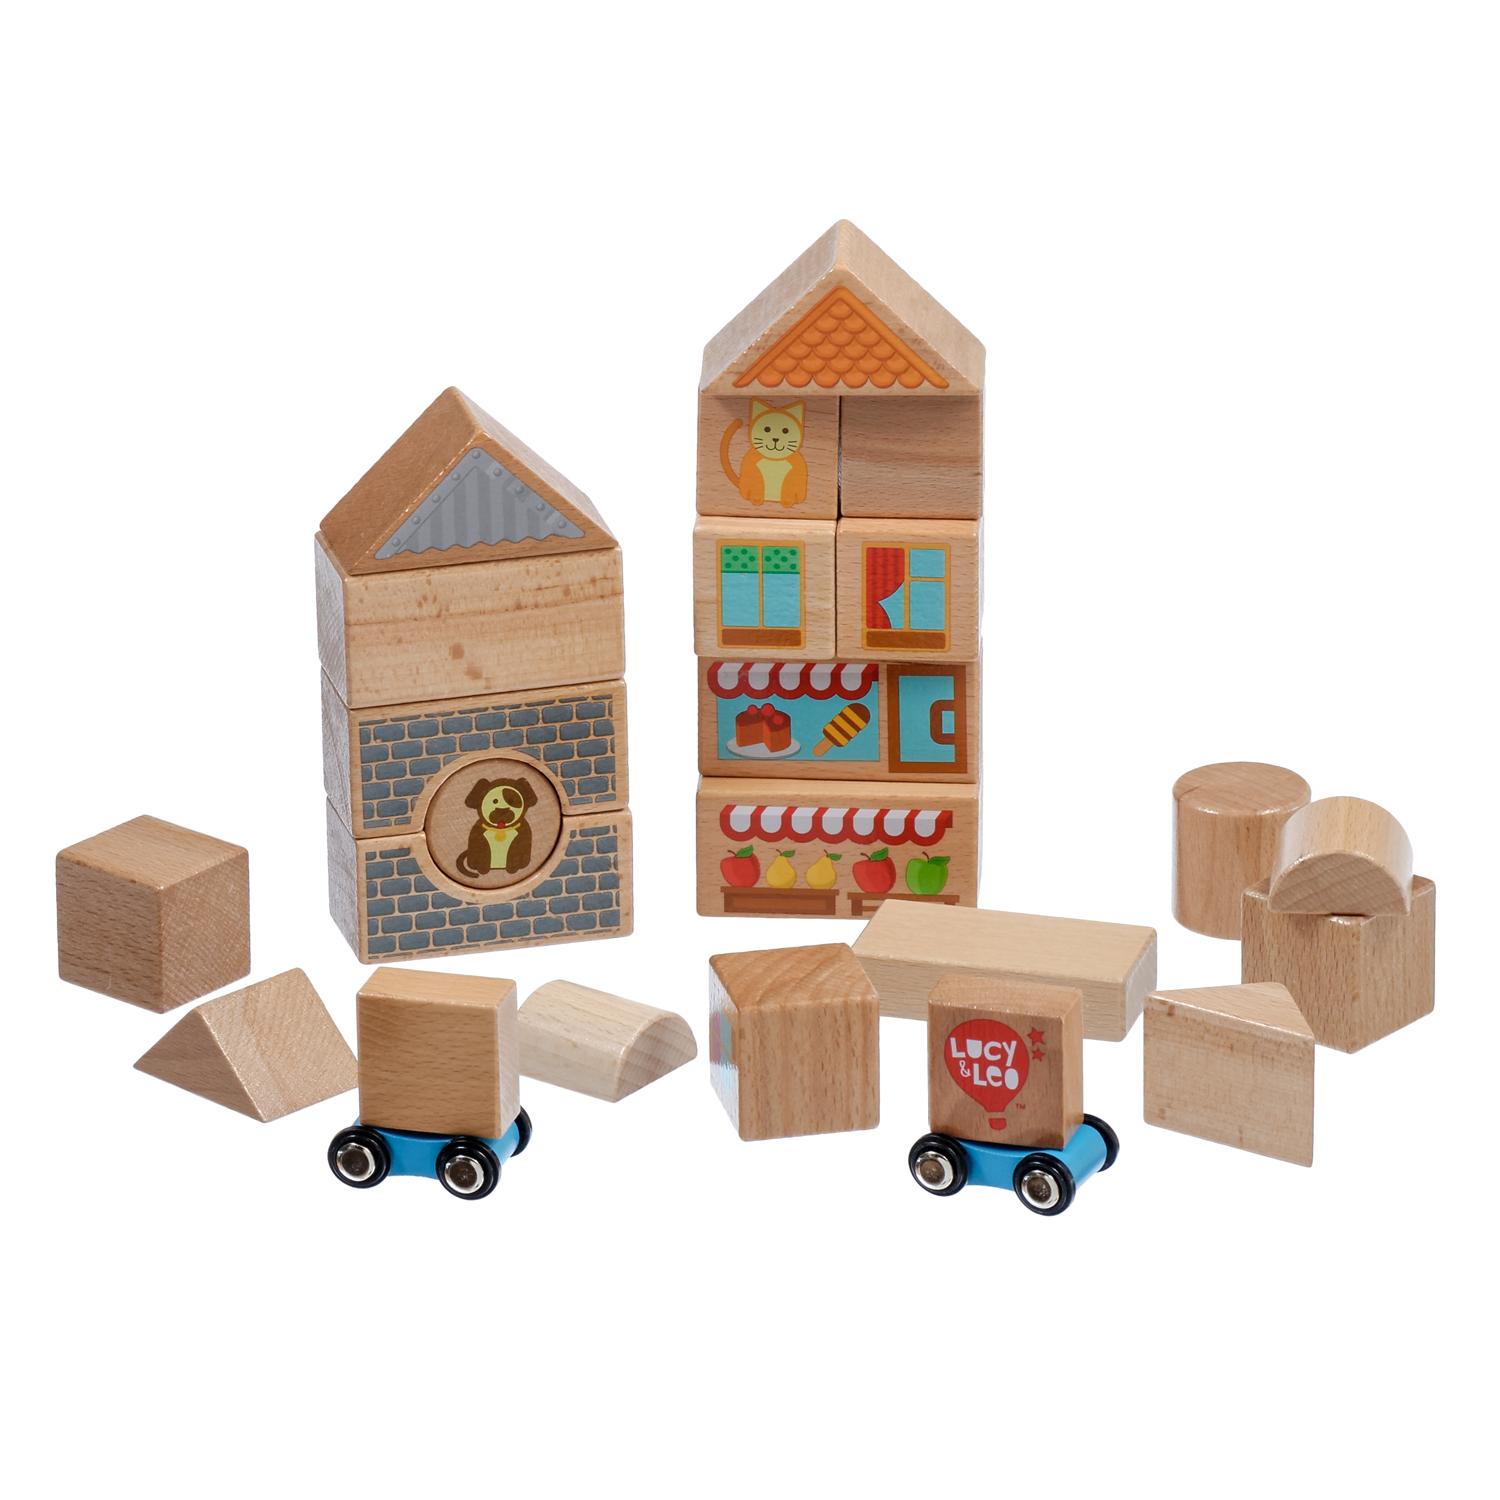 Lucy & Leo wooden toy Blocks (mid set, 25 ps) - Lucy & Leo